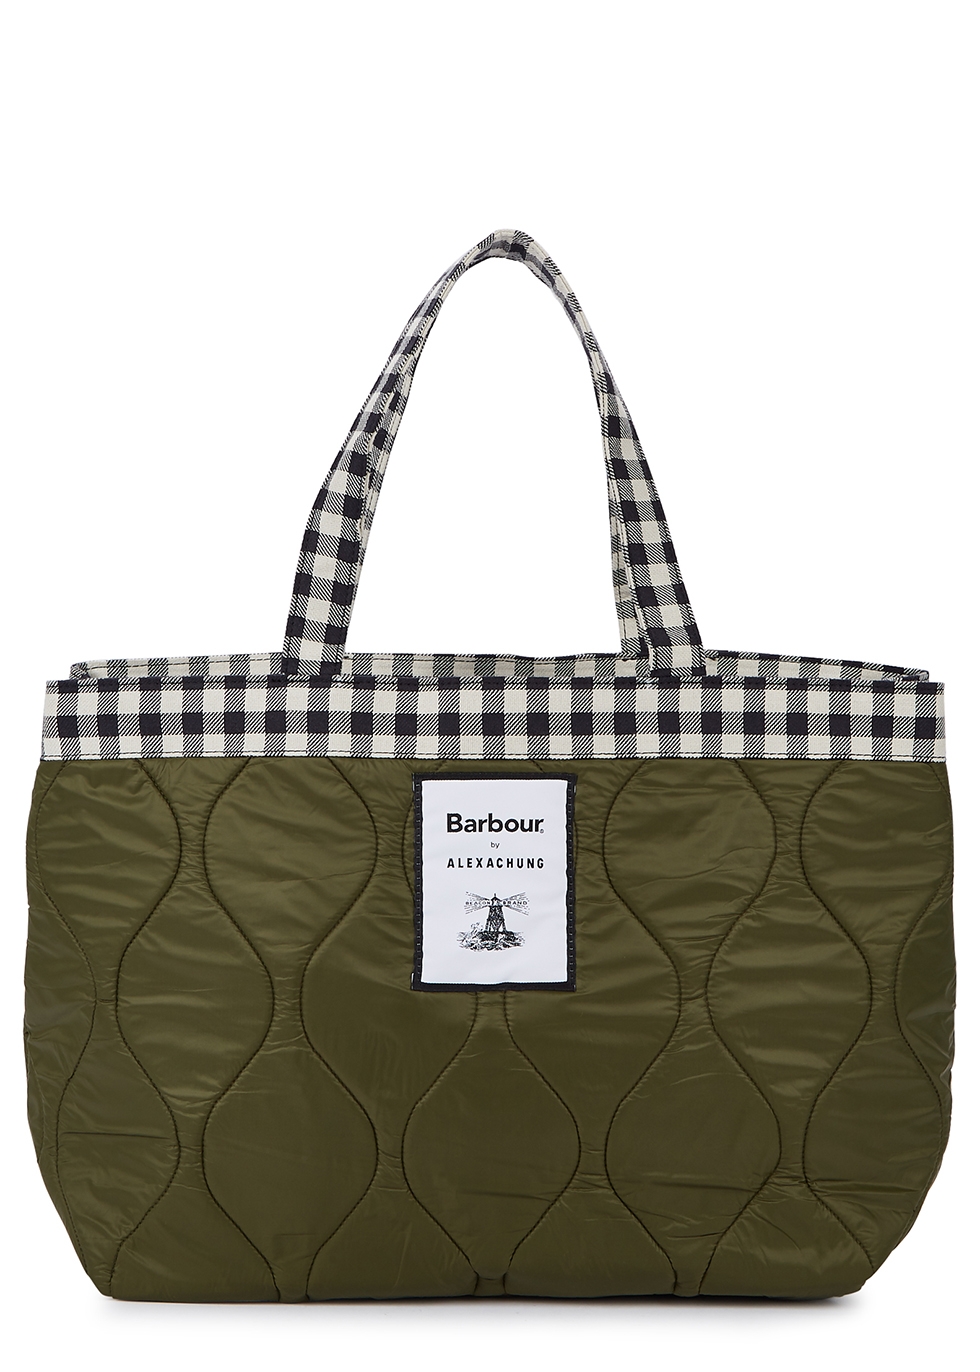 barbour quilted bag